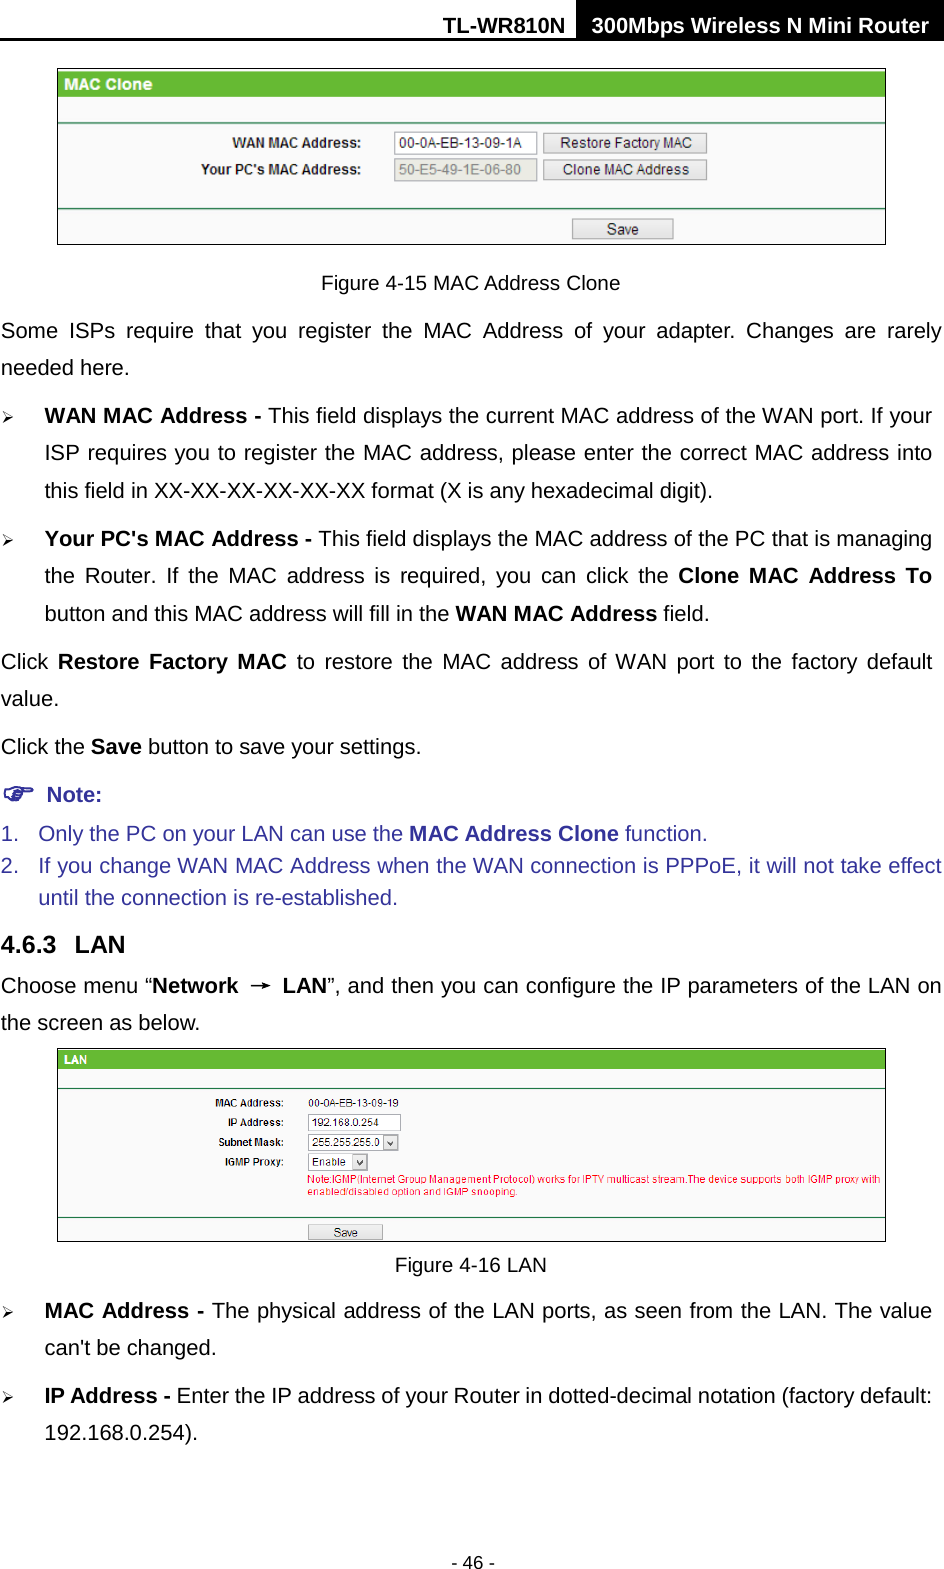 TL-WR810N 300Mbps Wireless N Mini Router  - 46 -  Figure 4-15 MAC Address Clone Some ISPs require that you register the MAC Address of your adapter.  Changes are rarely needed here.  WAN MAC Address - This field displays the current MAC address of the WAN port. If your ISP requires you to register the MAC address, please enter the correct MAC address into this field in XX-XX-XX-XX-XX-XX format (X is any hexadecimal digit).    Your PC&apos;s MAC Address - This field displays the MAC address of the PC that is managing the Router. If the MAC address is required, you can click the Clone MAC Address To button and this MAC address will fill in the WAN MAC Address field. Click  Restore Factory MAC to restore the MAC address of WAN port to the factory default value. Click the Save button to save your settings.  Note:   1. Only the PC on your LAN can use the MAC Address Clone function. 2. If you change WAN MAC Address when the WAN connection is PPPoE, it will not take effect until the connection is re-established. 4.6.3 LAN Choose menu “Network → LAN”, and then you can configure the IP parameters of the LAN on the screen as below.  Figure 4-16 LAN  MAC Address - The physical address of the LAN ports, as seen from the LAN. The value can&apos;t be changed.  IP Address - Enter the IP address of your Router in dotted-decimal notation (factory default: 192.168.0.254). 